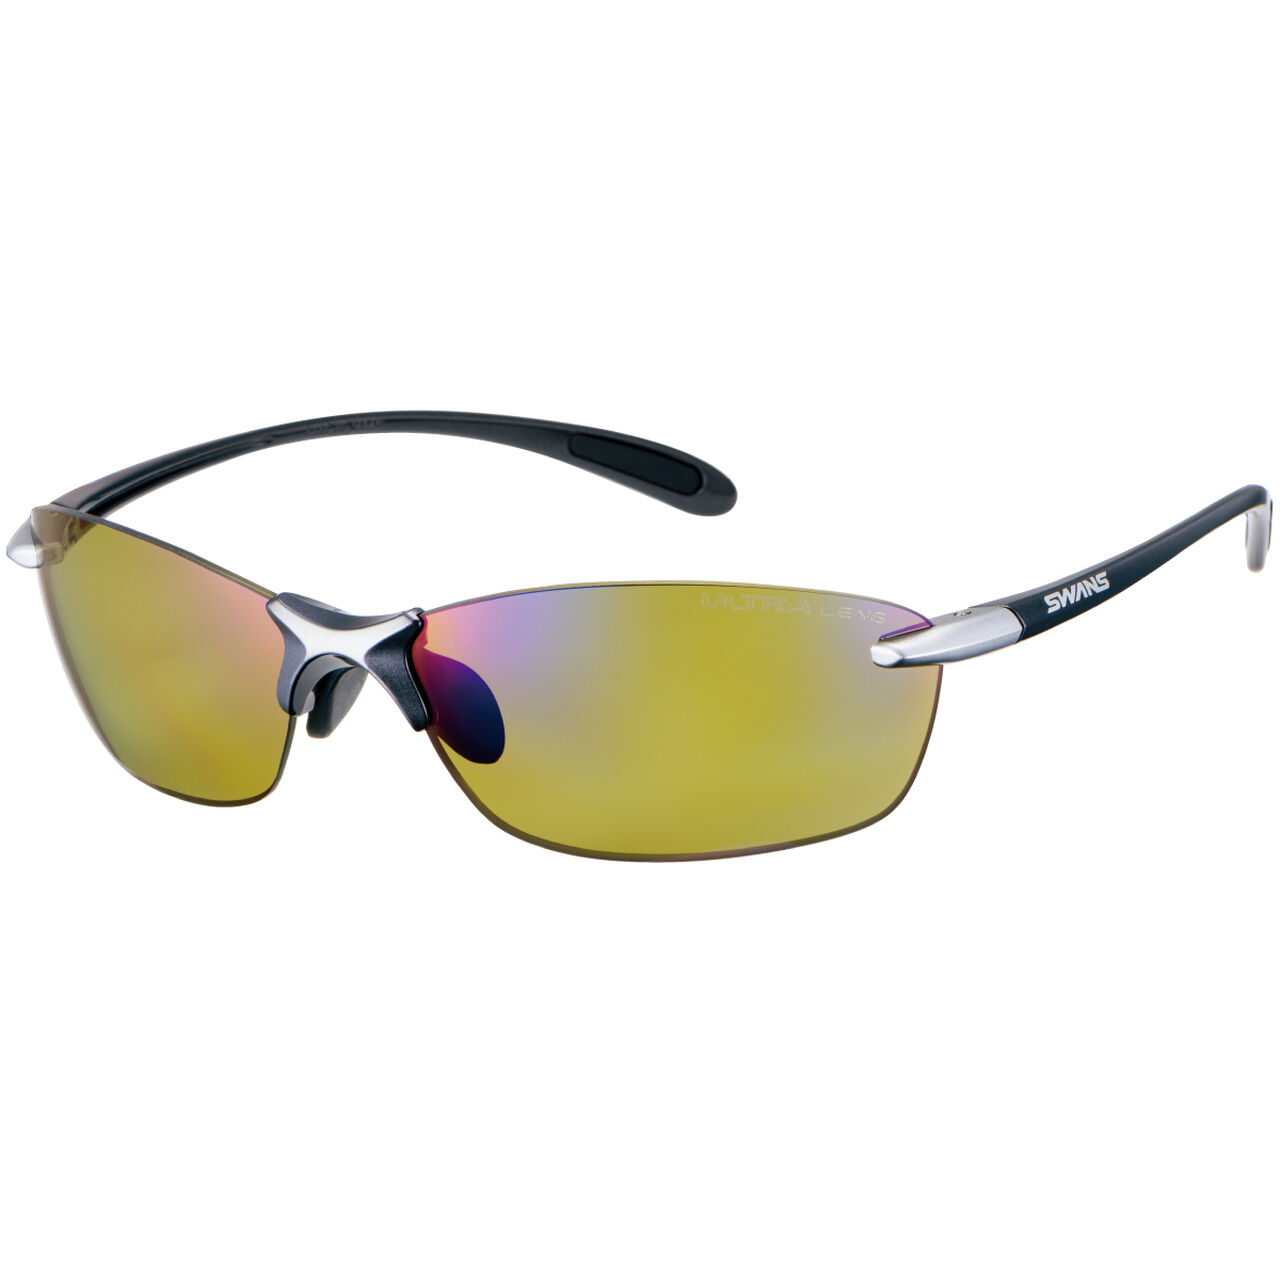 SA-Fit 0168 GMR Polarized ULTRA Light green,Opt5, large image number 0